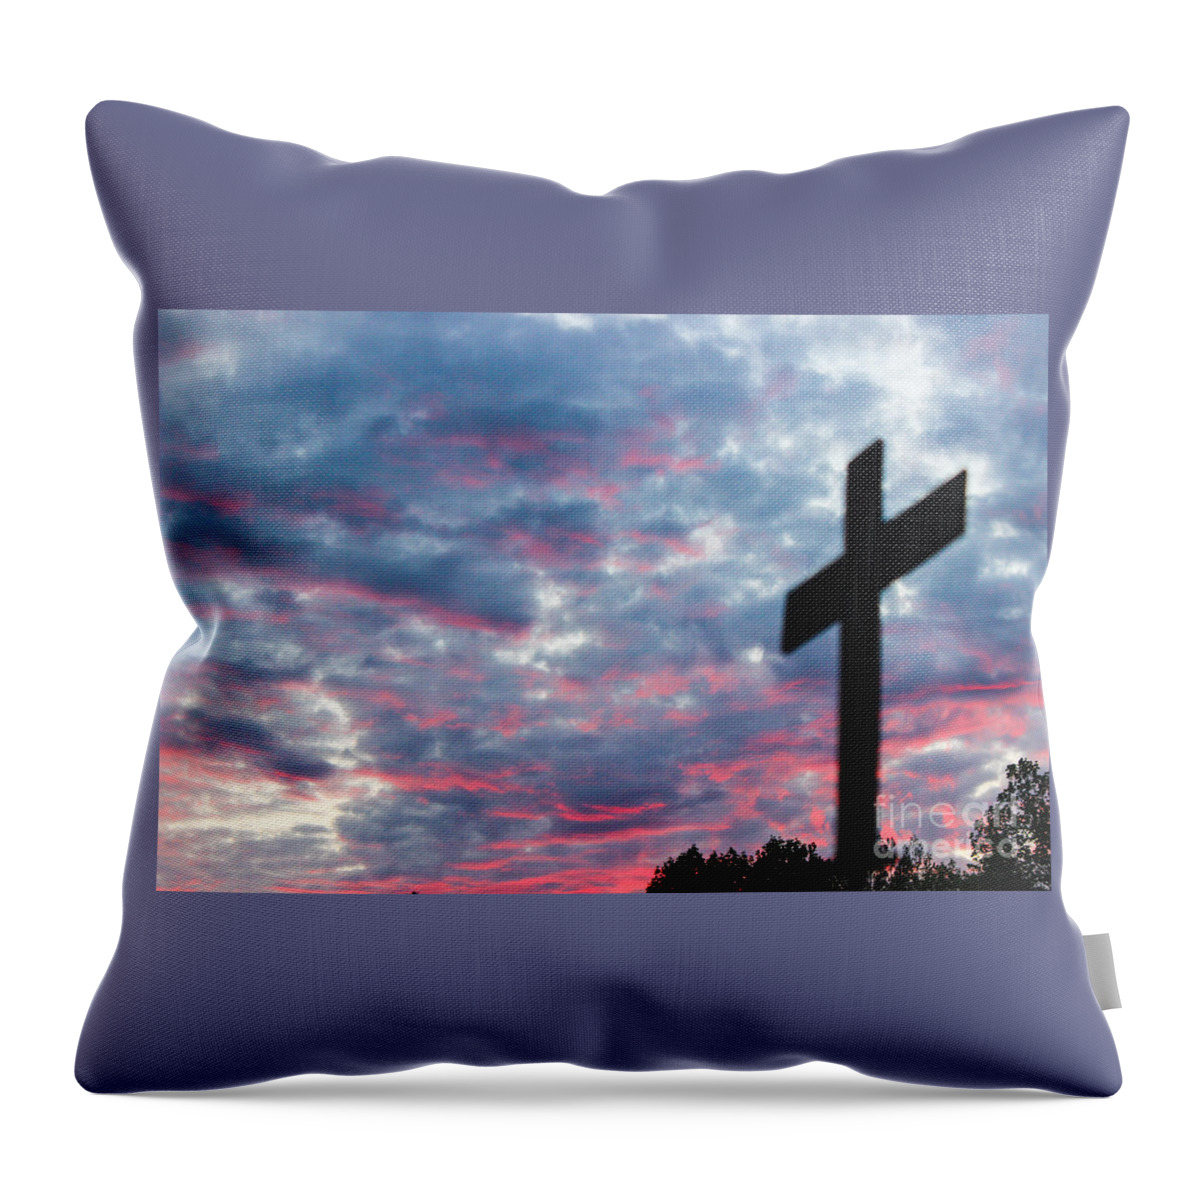 The Cross Form Set Against Turbulent Skies Reminds Us Of The Day Christ Gave It All Up For Us. Throw Pillow featuring the photograph Reminded by Robin Coaker